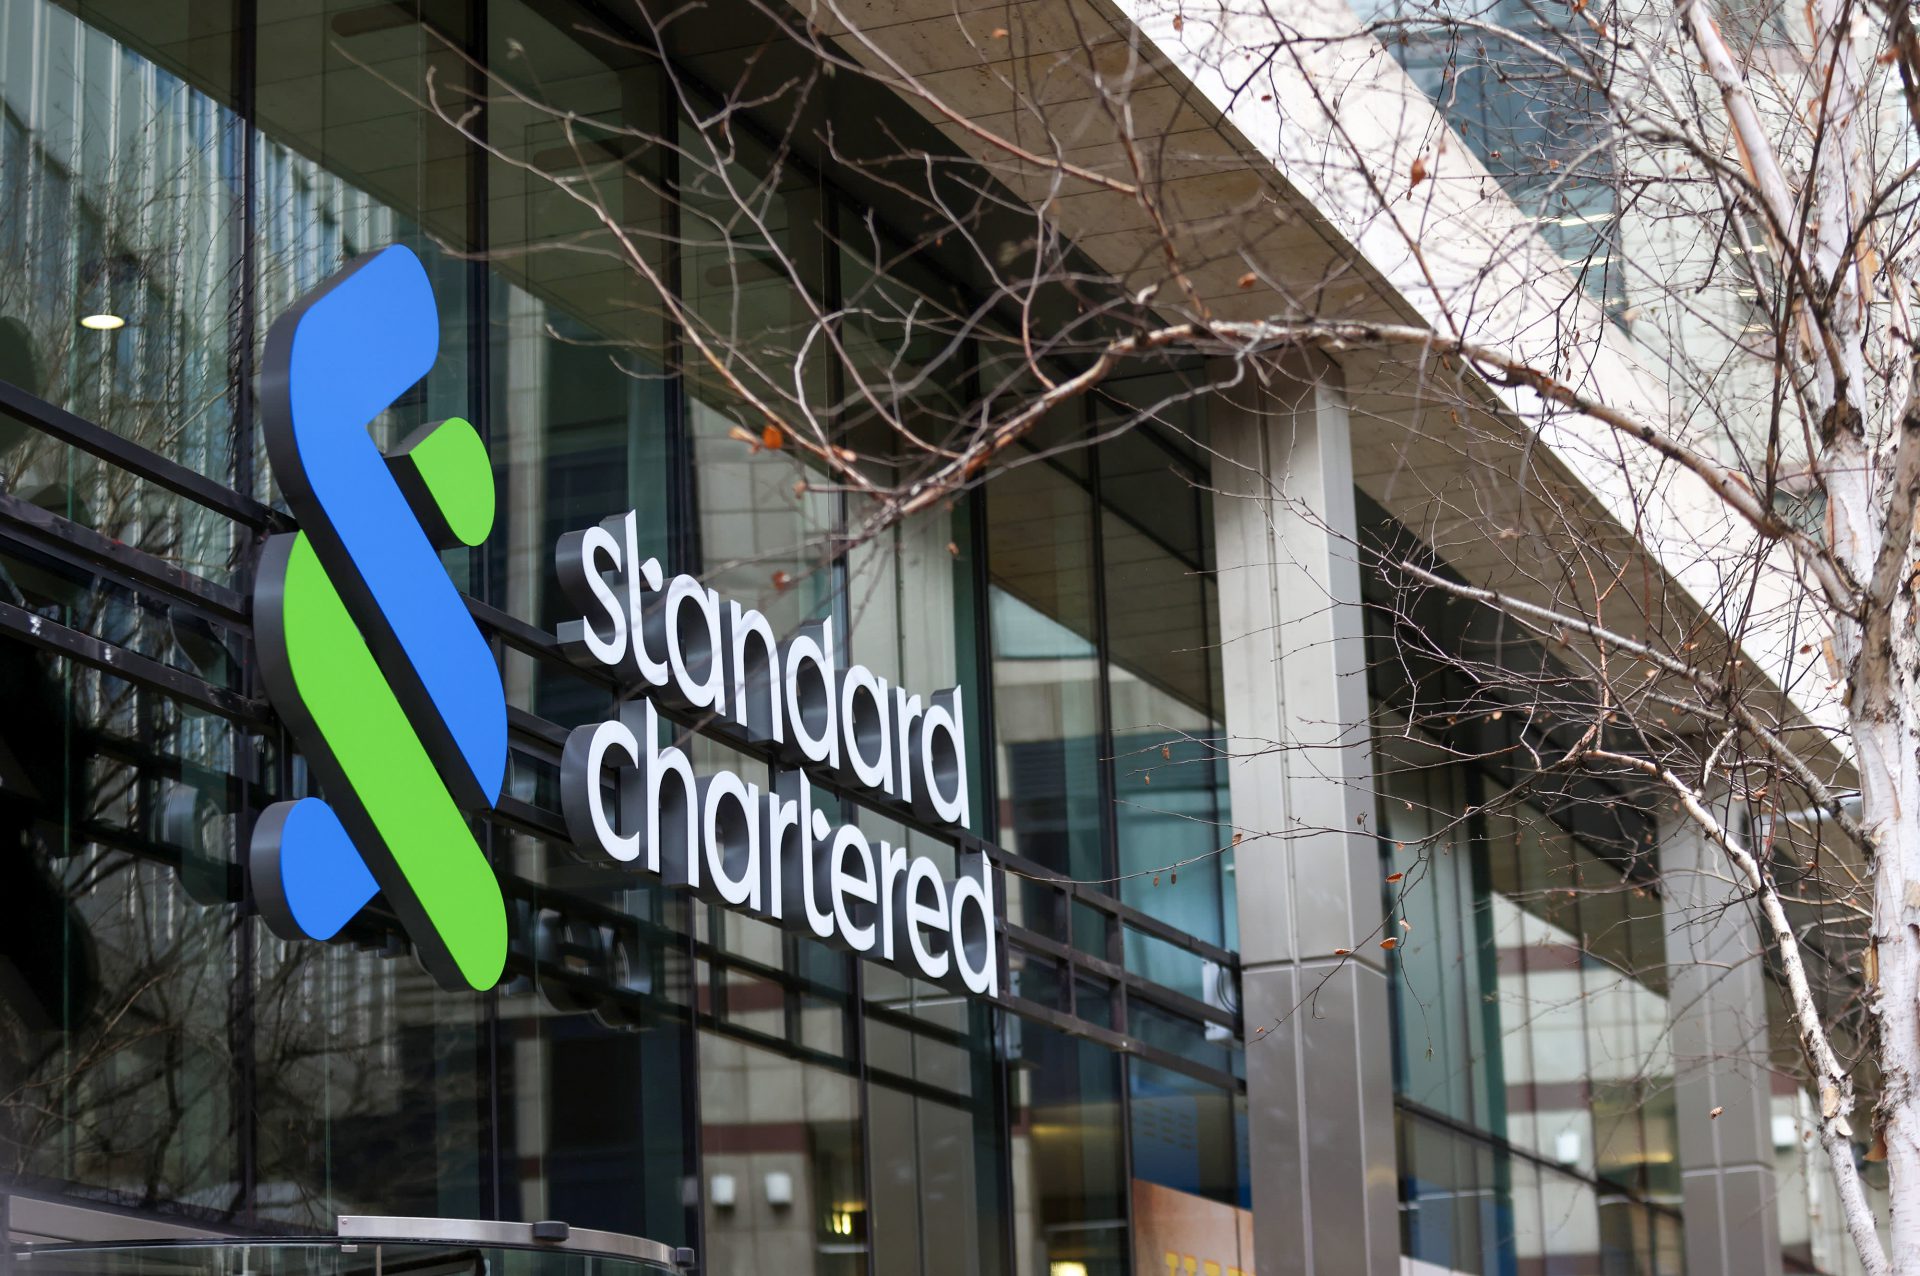 Bitcoin to Hit a New All-Time High This Week: Standard Chartered